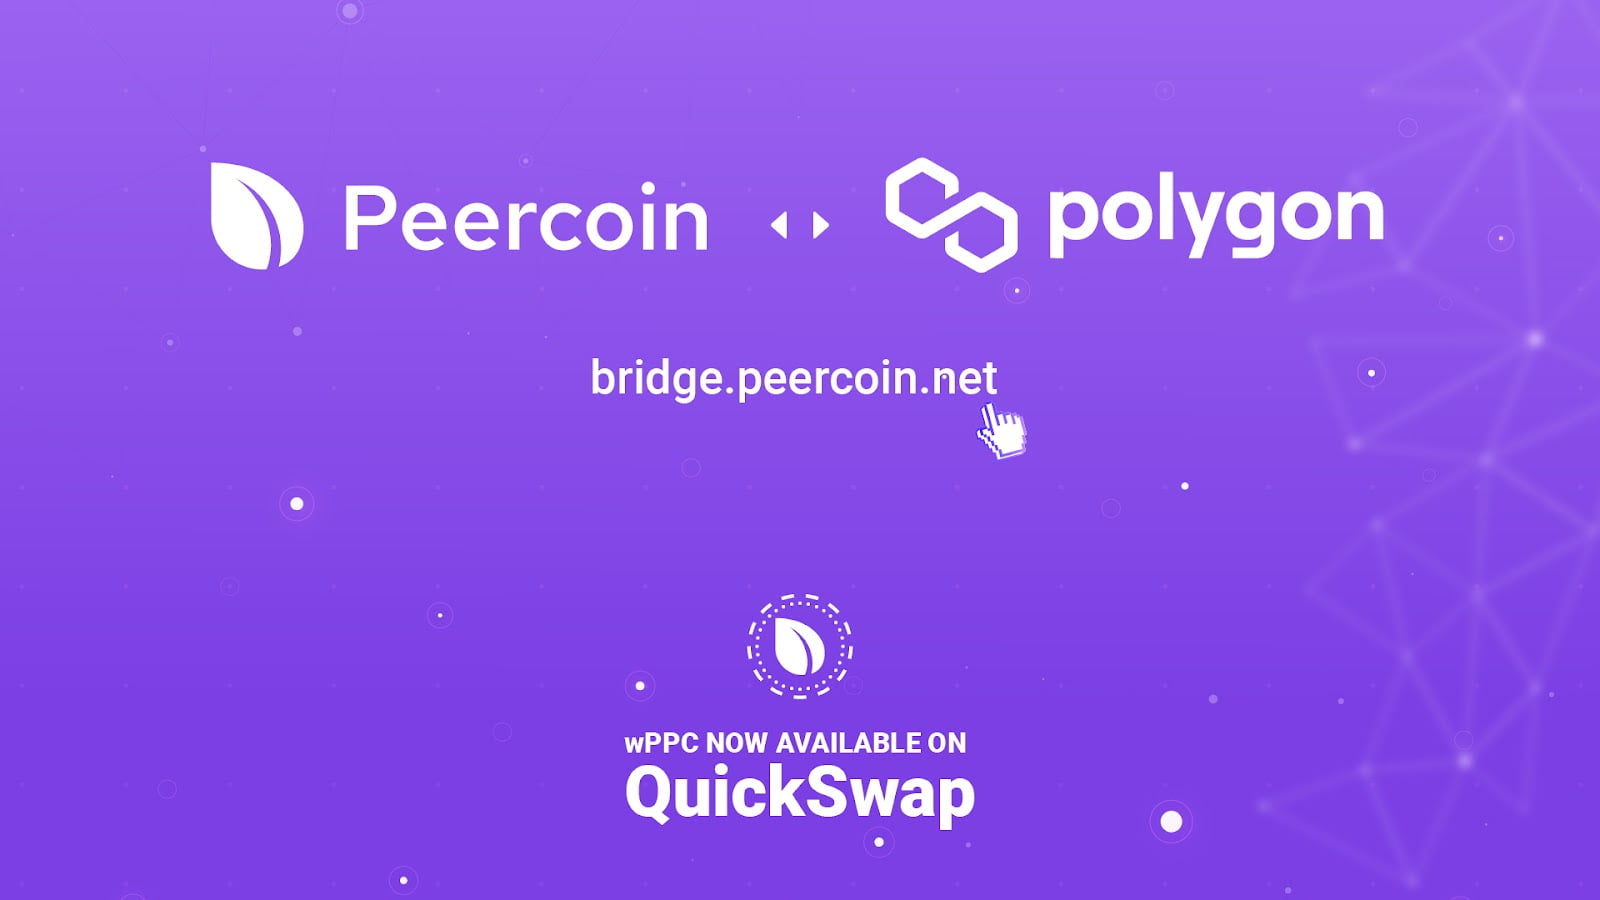 Proof of Stake pioneer Peercoin continues cross-chain expansion with listing on Polygon’s QuickSwap 16